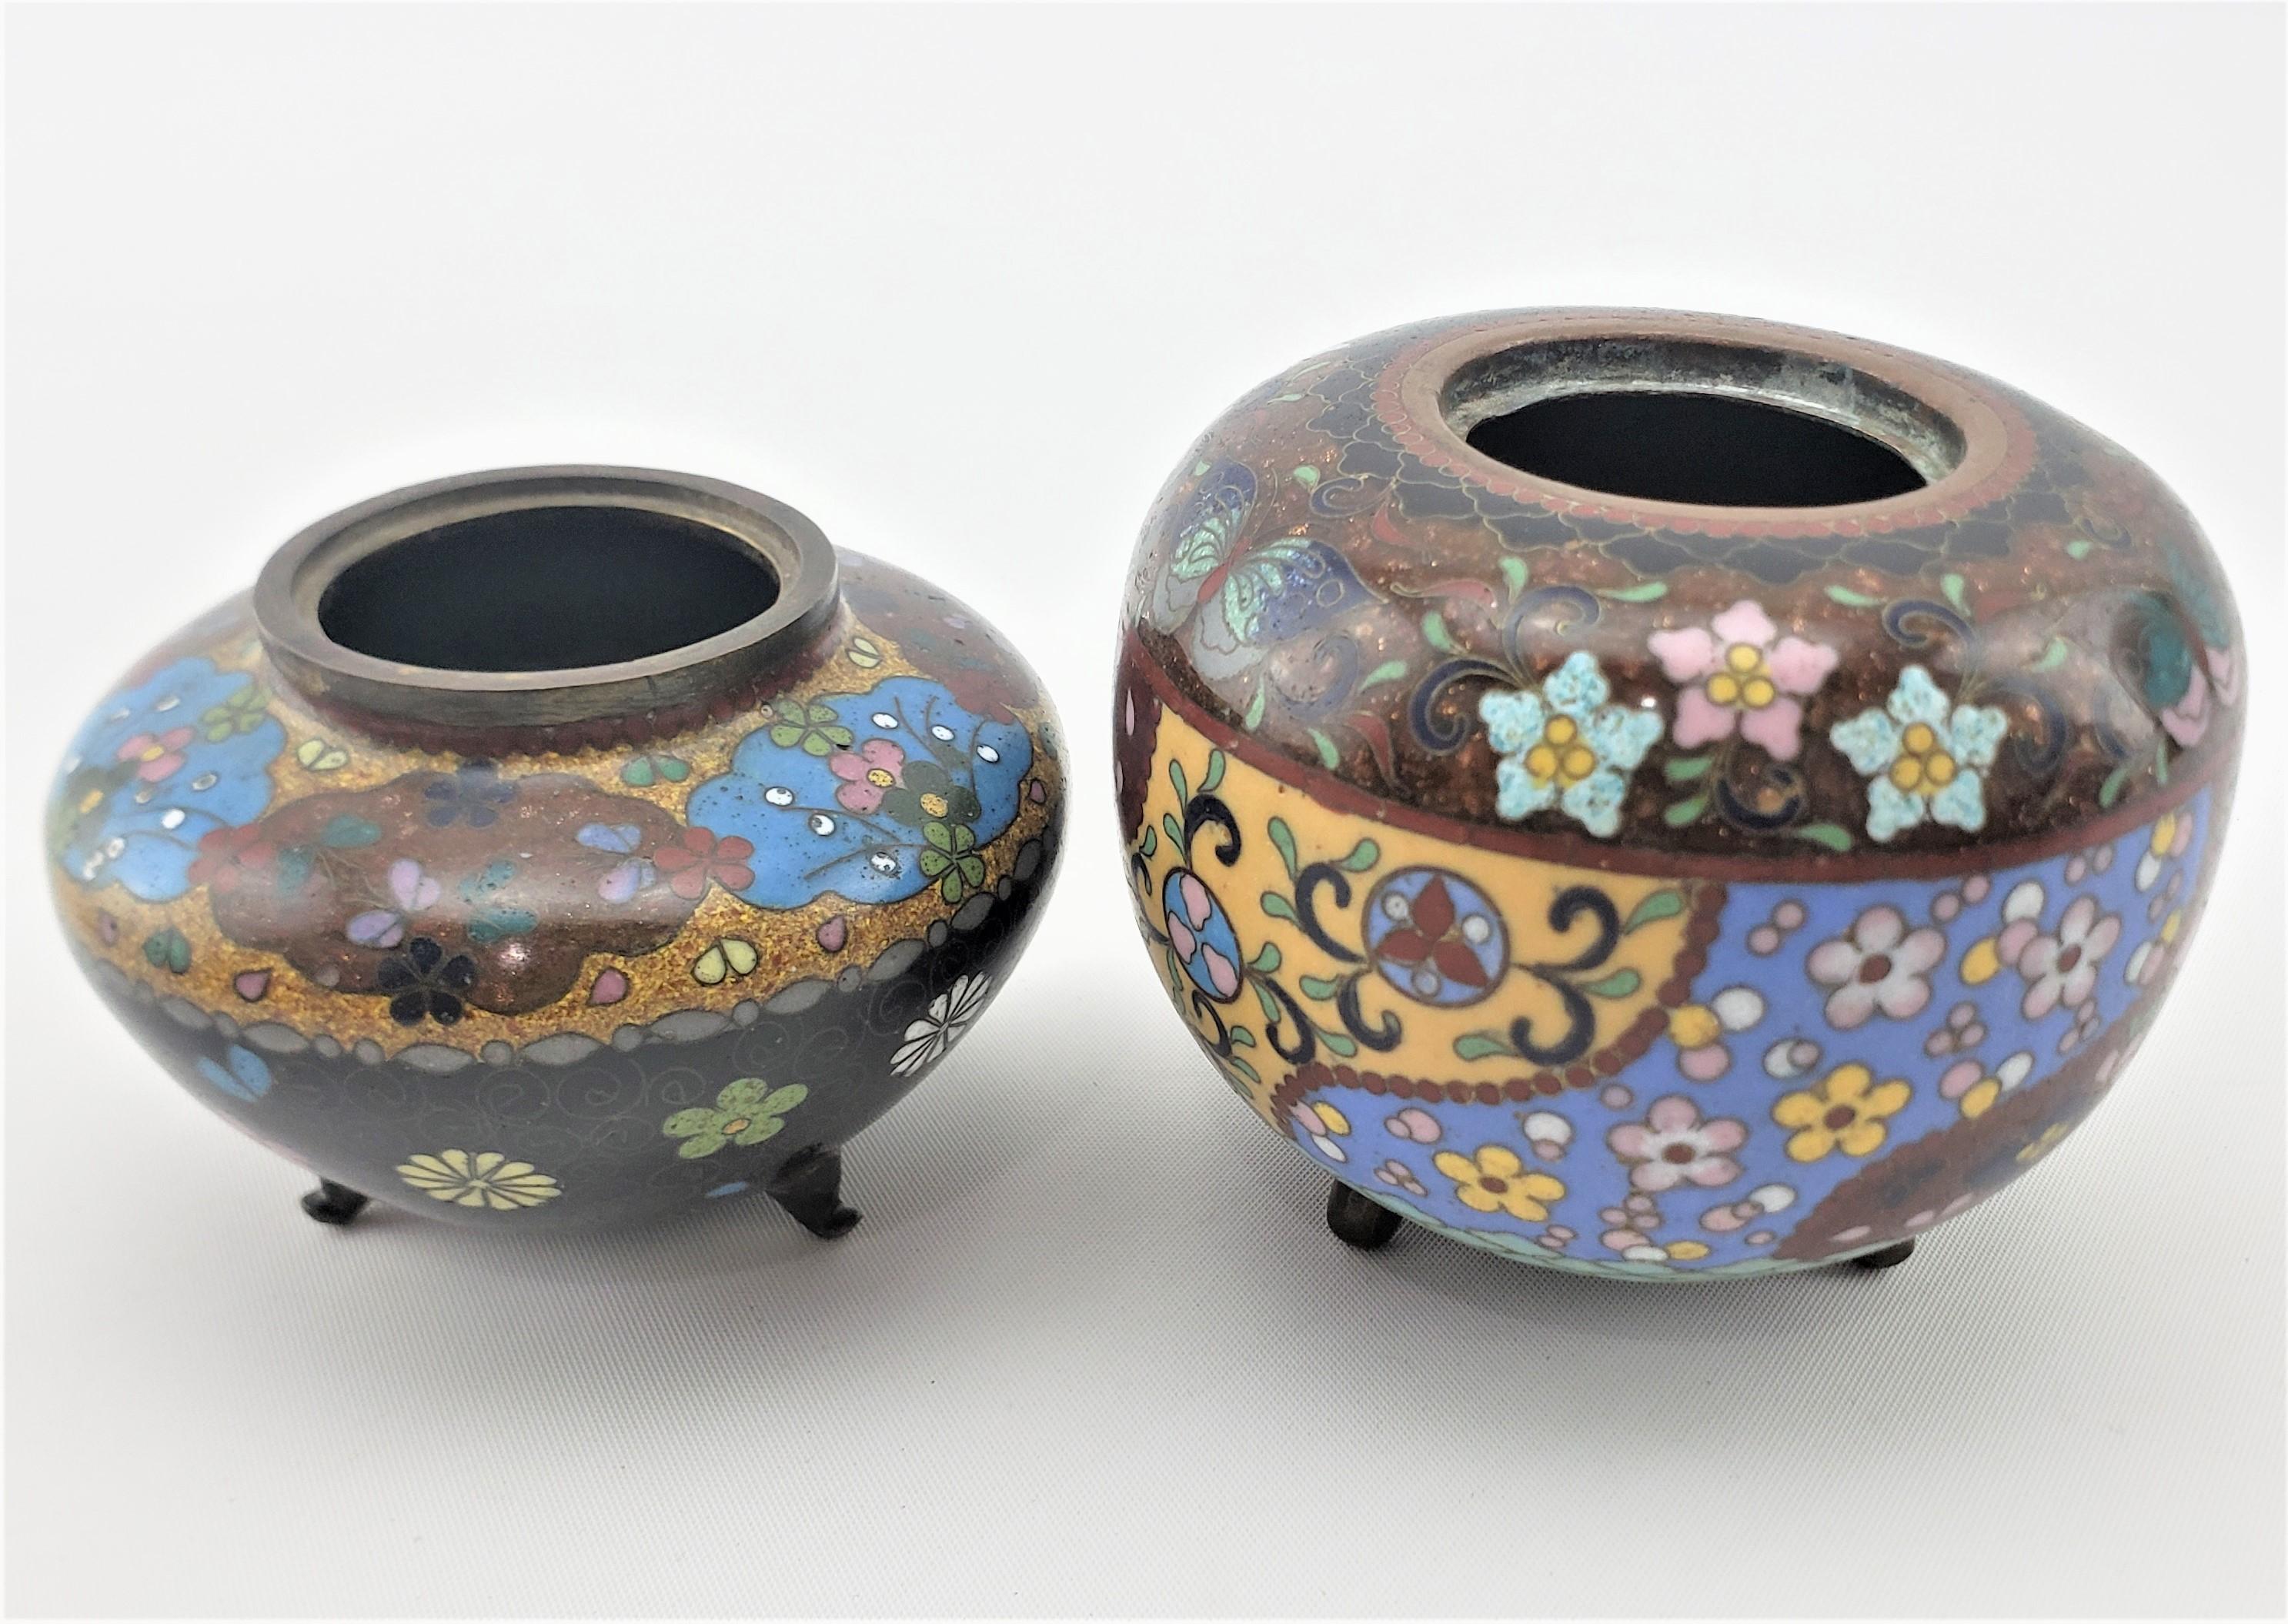 Pair of Antique Japanese Cloisonne Covered Jars with Floral Motif Decoration For Sale 3